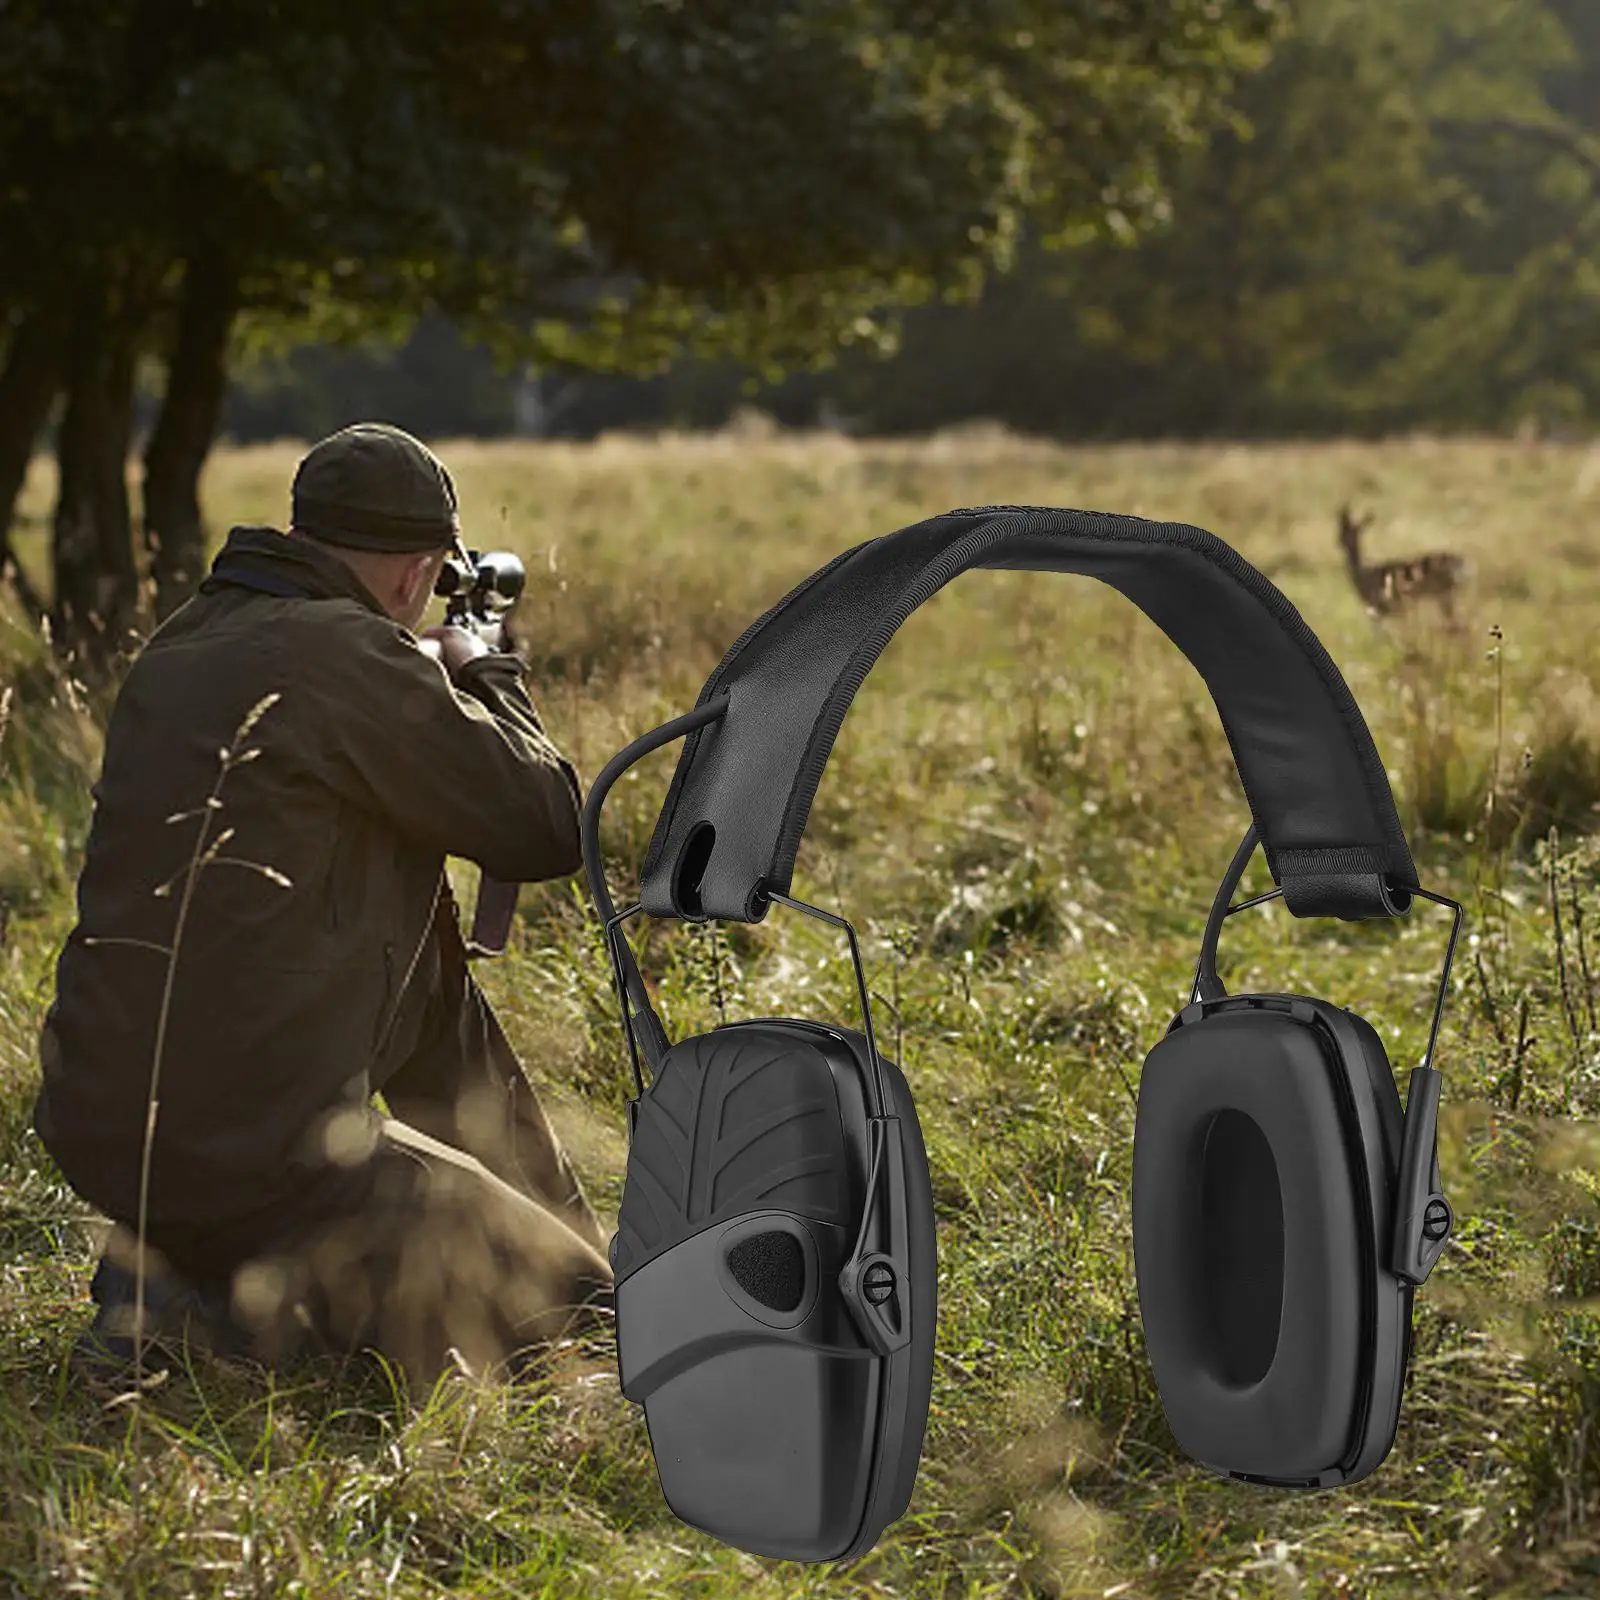 Head Mounted Hearing Protection Earmuff Folding Headphones Ear Plugs Noise Reduction Protective Headset for Mowing Gameing